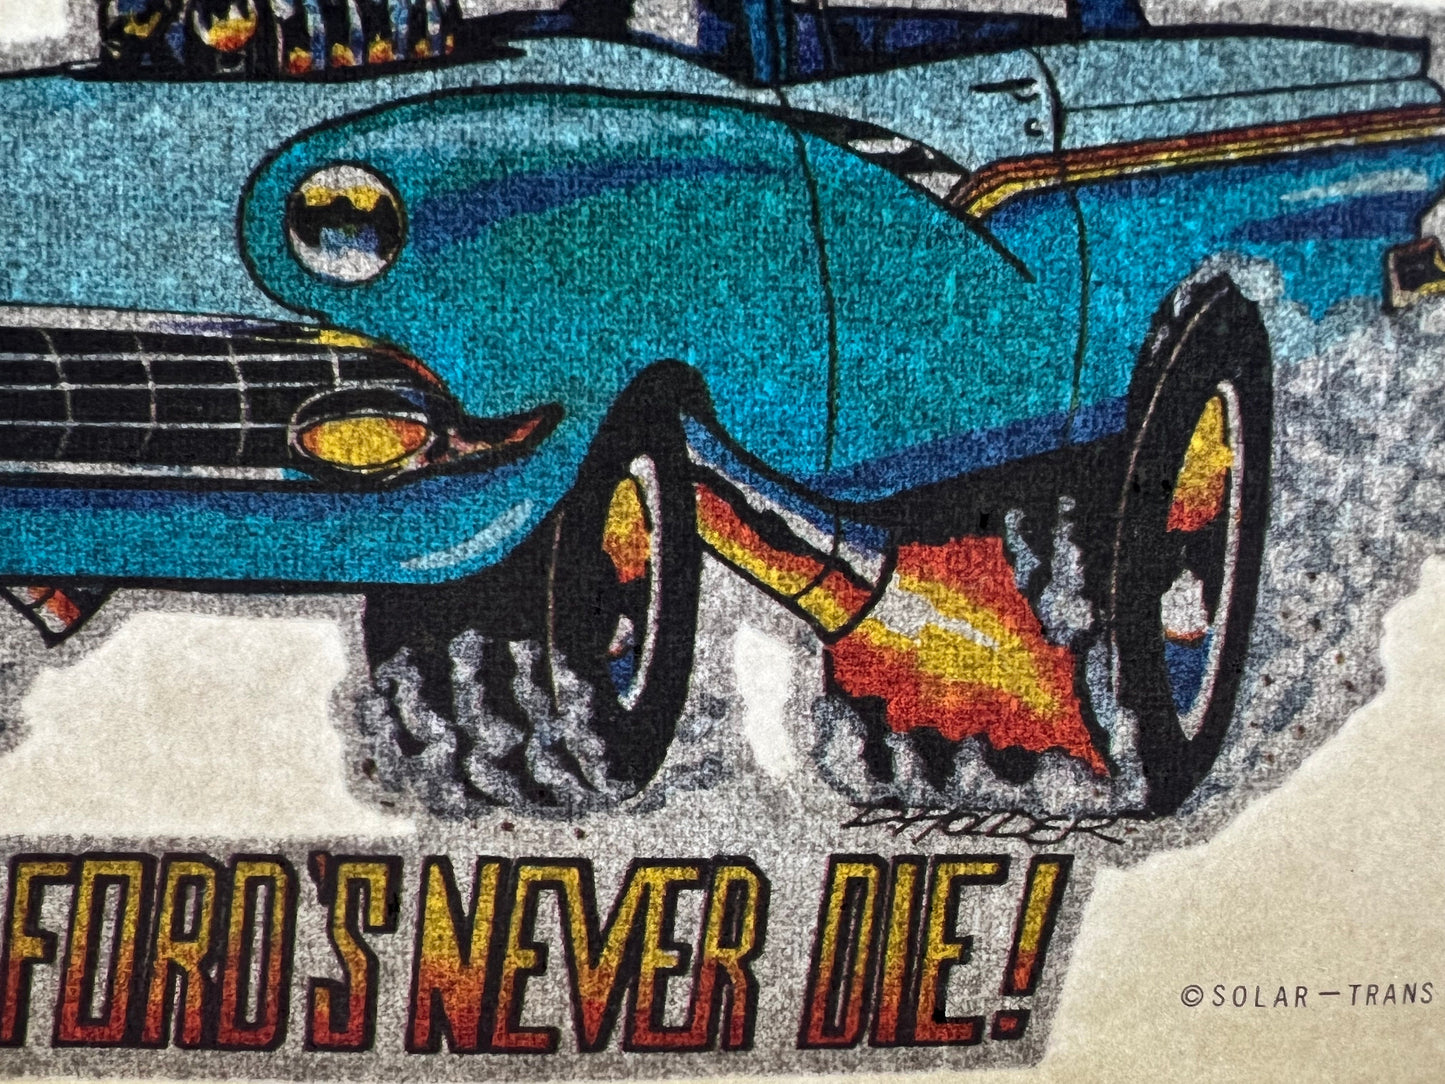 56 Old Ford's Never Die Vintage Iron On Heat Transfer